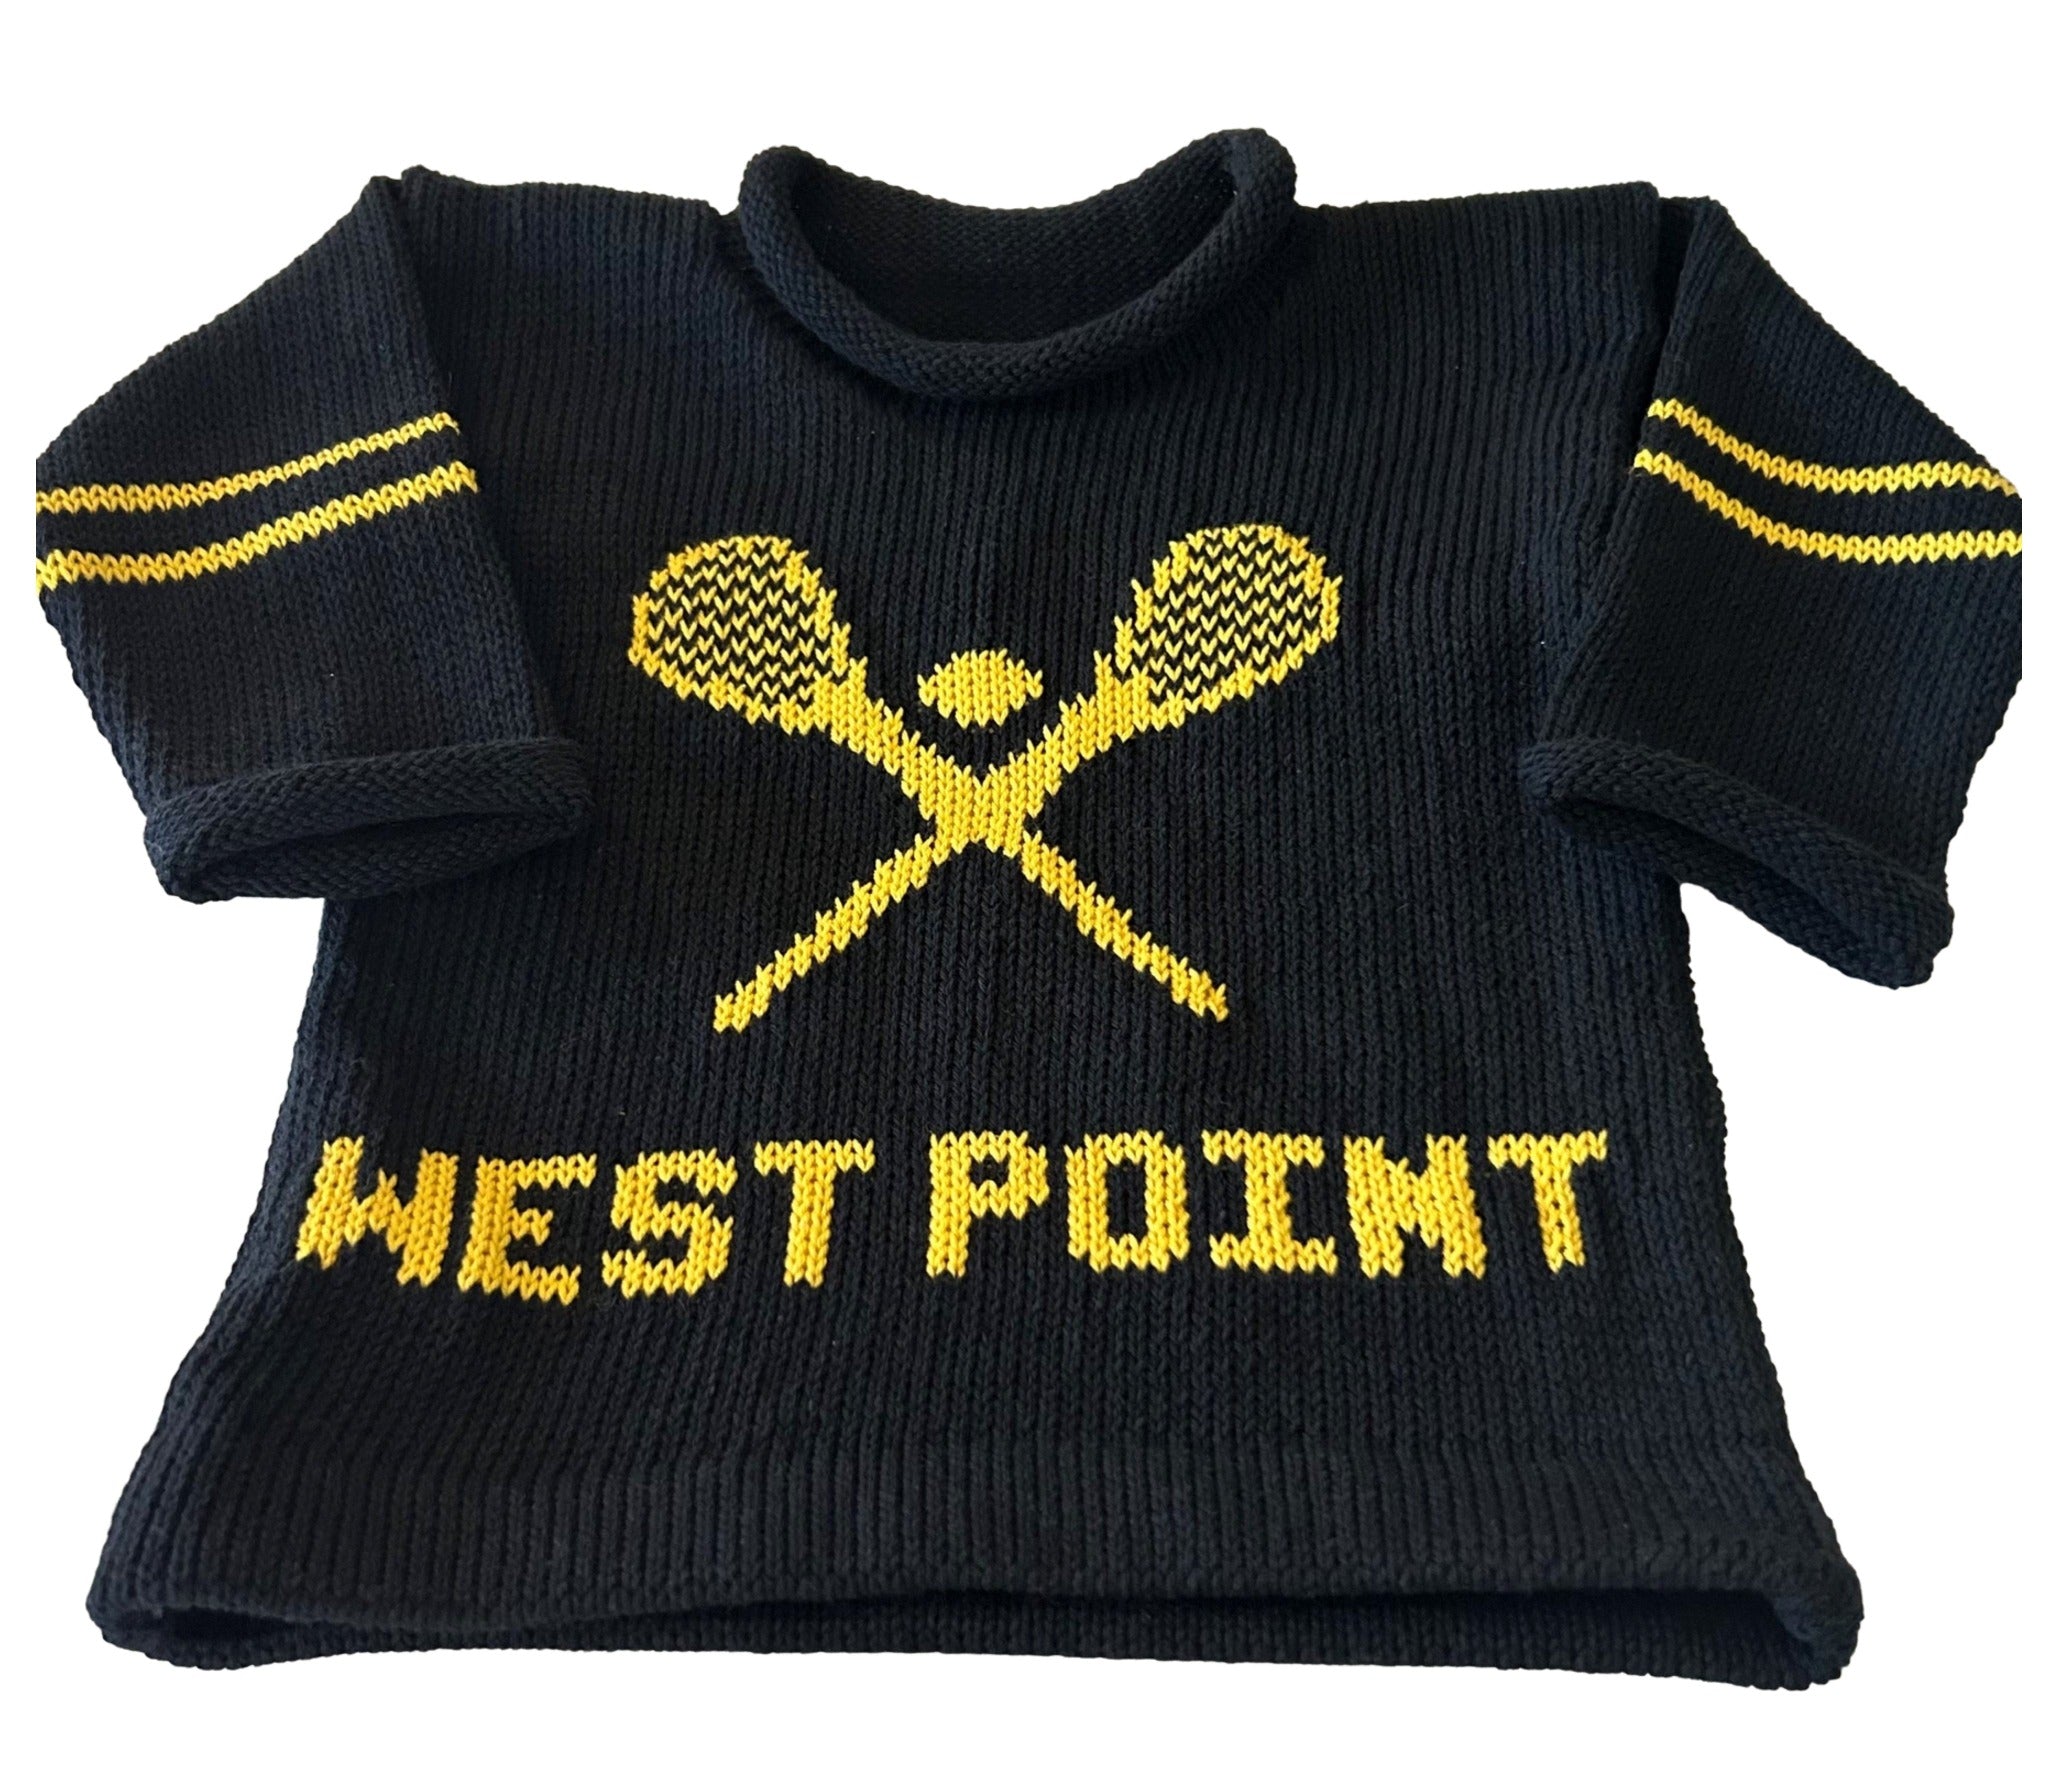 West Point Lacrosse Team Spirit Sweater - Custom Knits for Baby